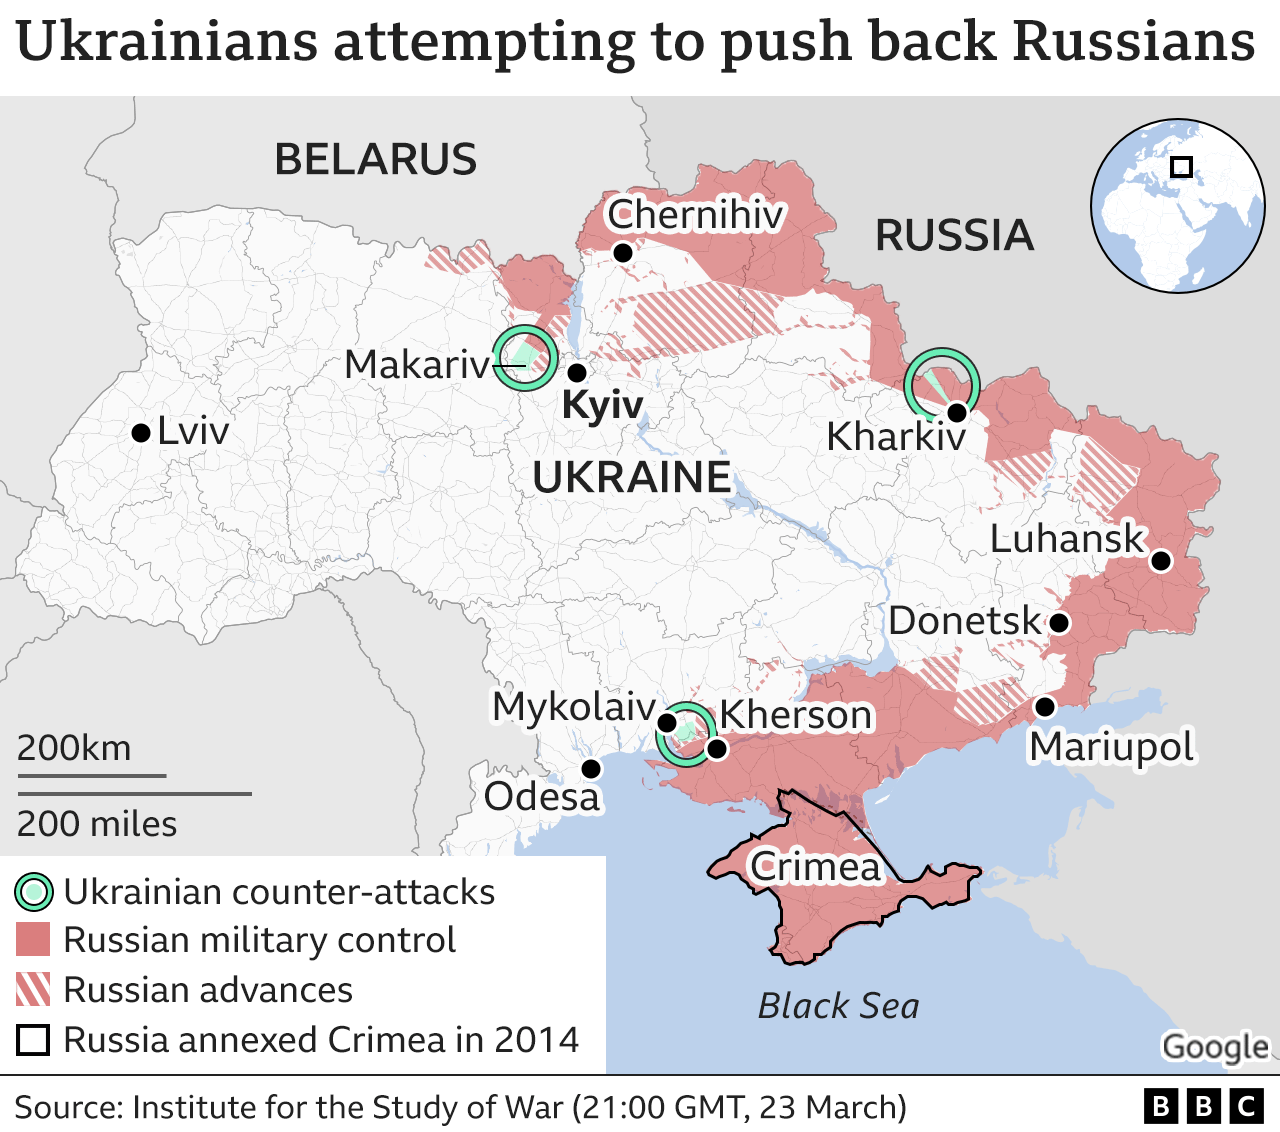 Map showing Russian advances and Ukrainian counter attacks